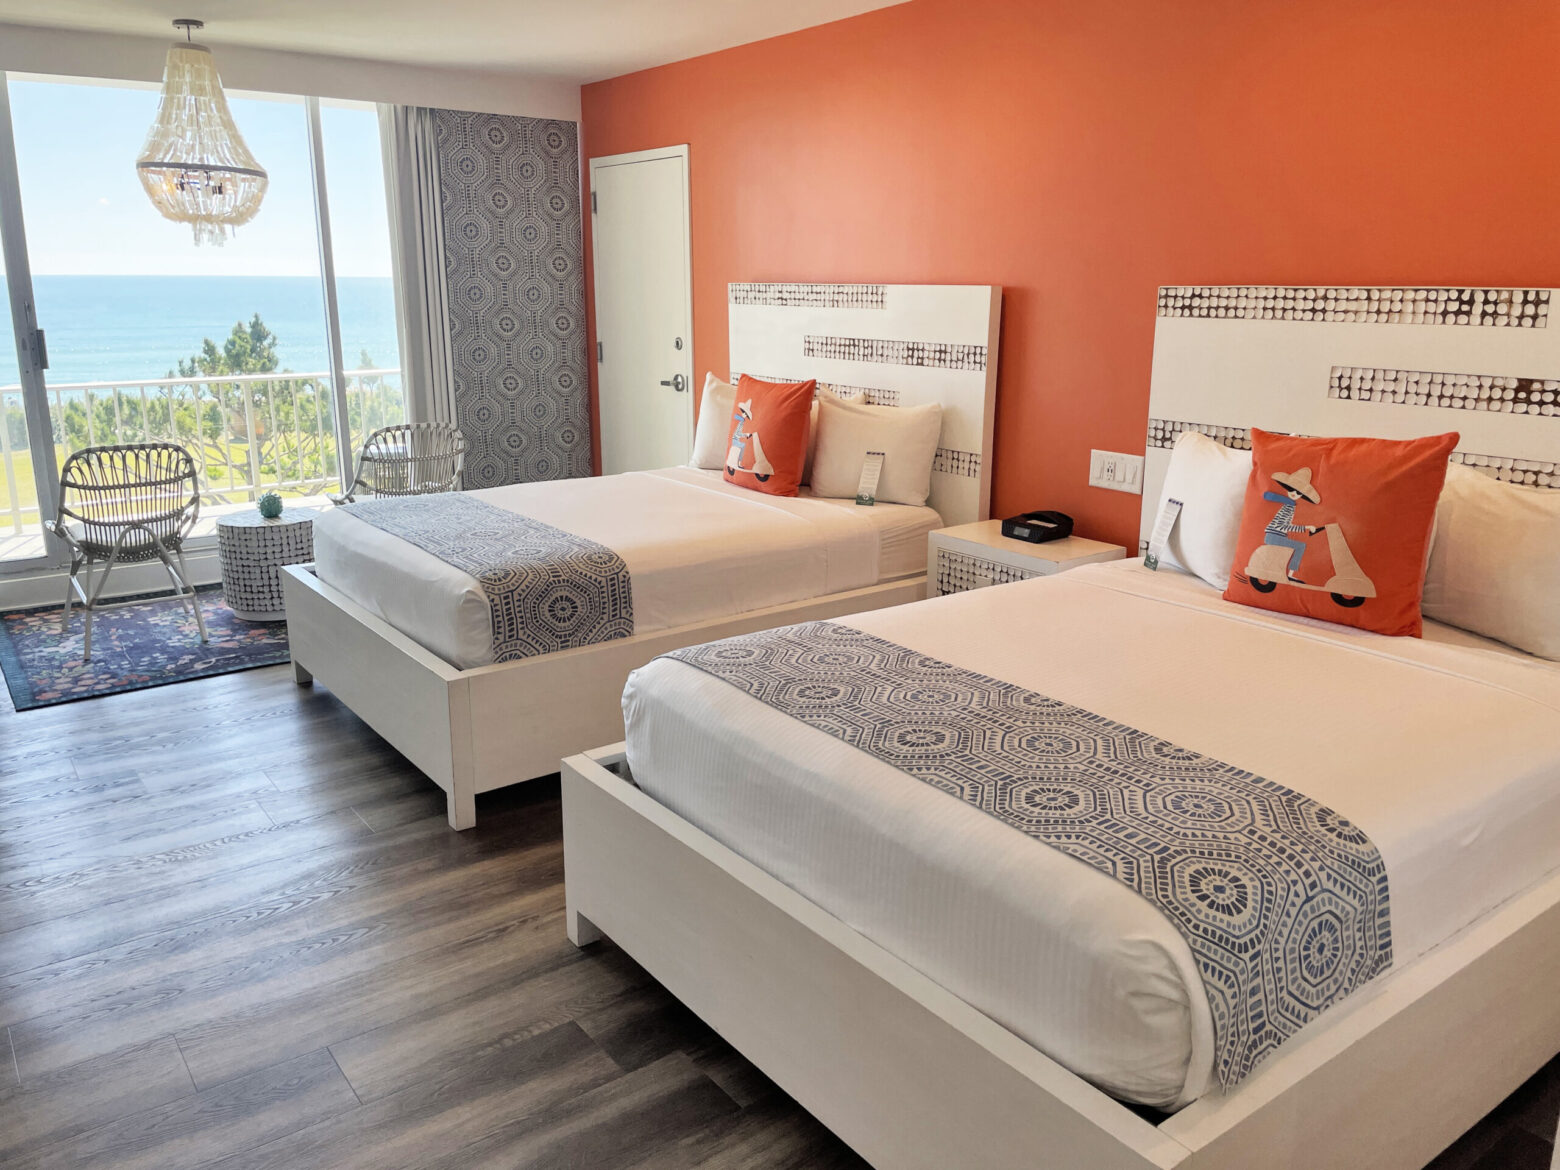 Two queen beds with brightly colored bedding and ocean views.